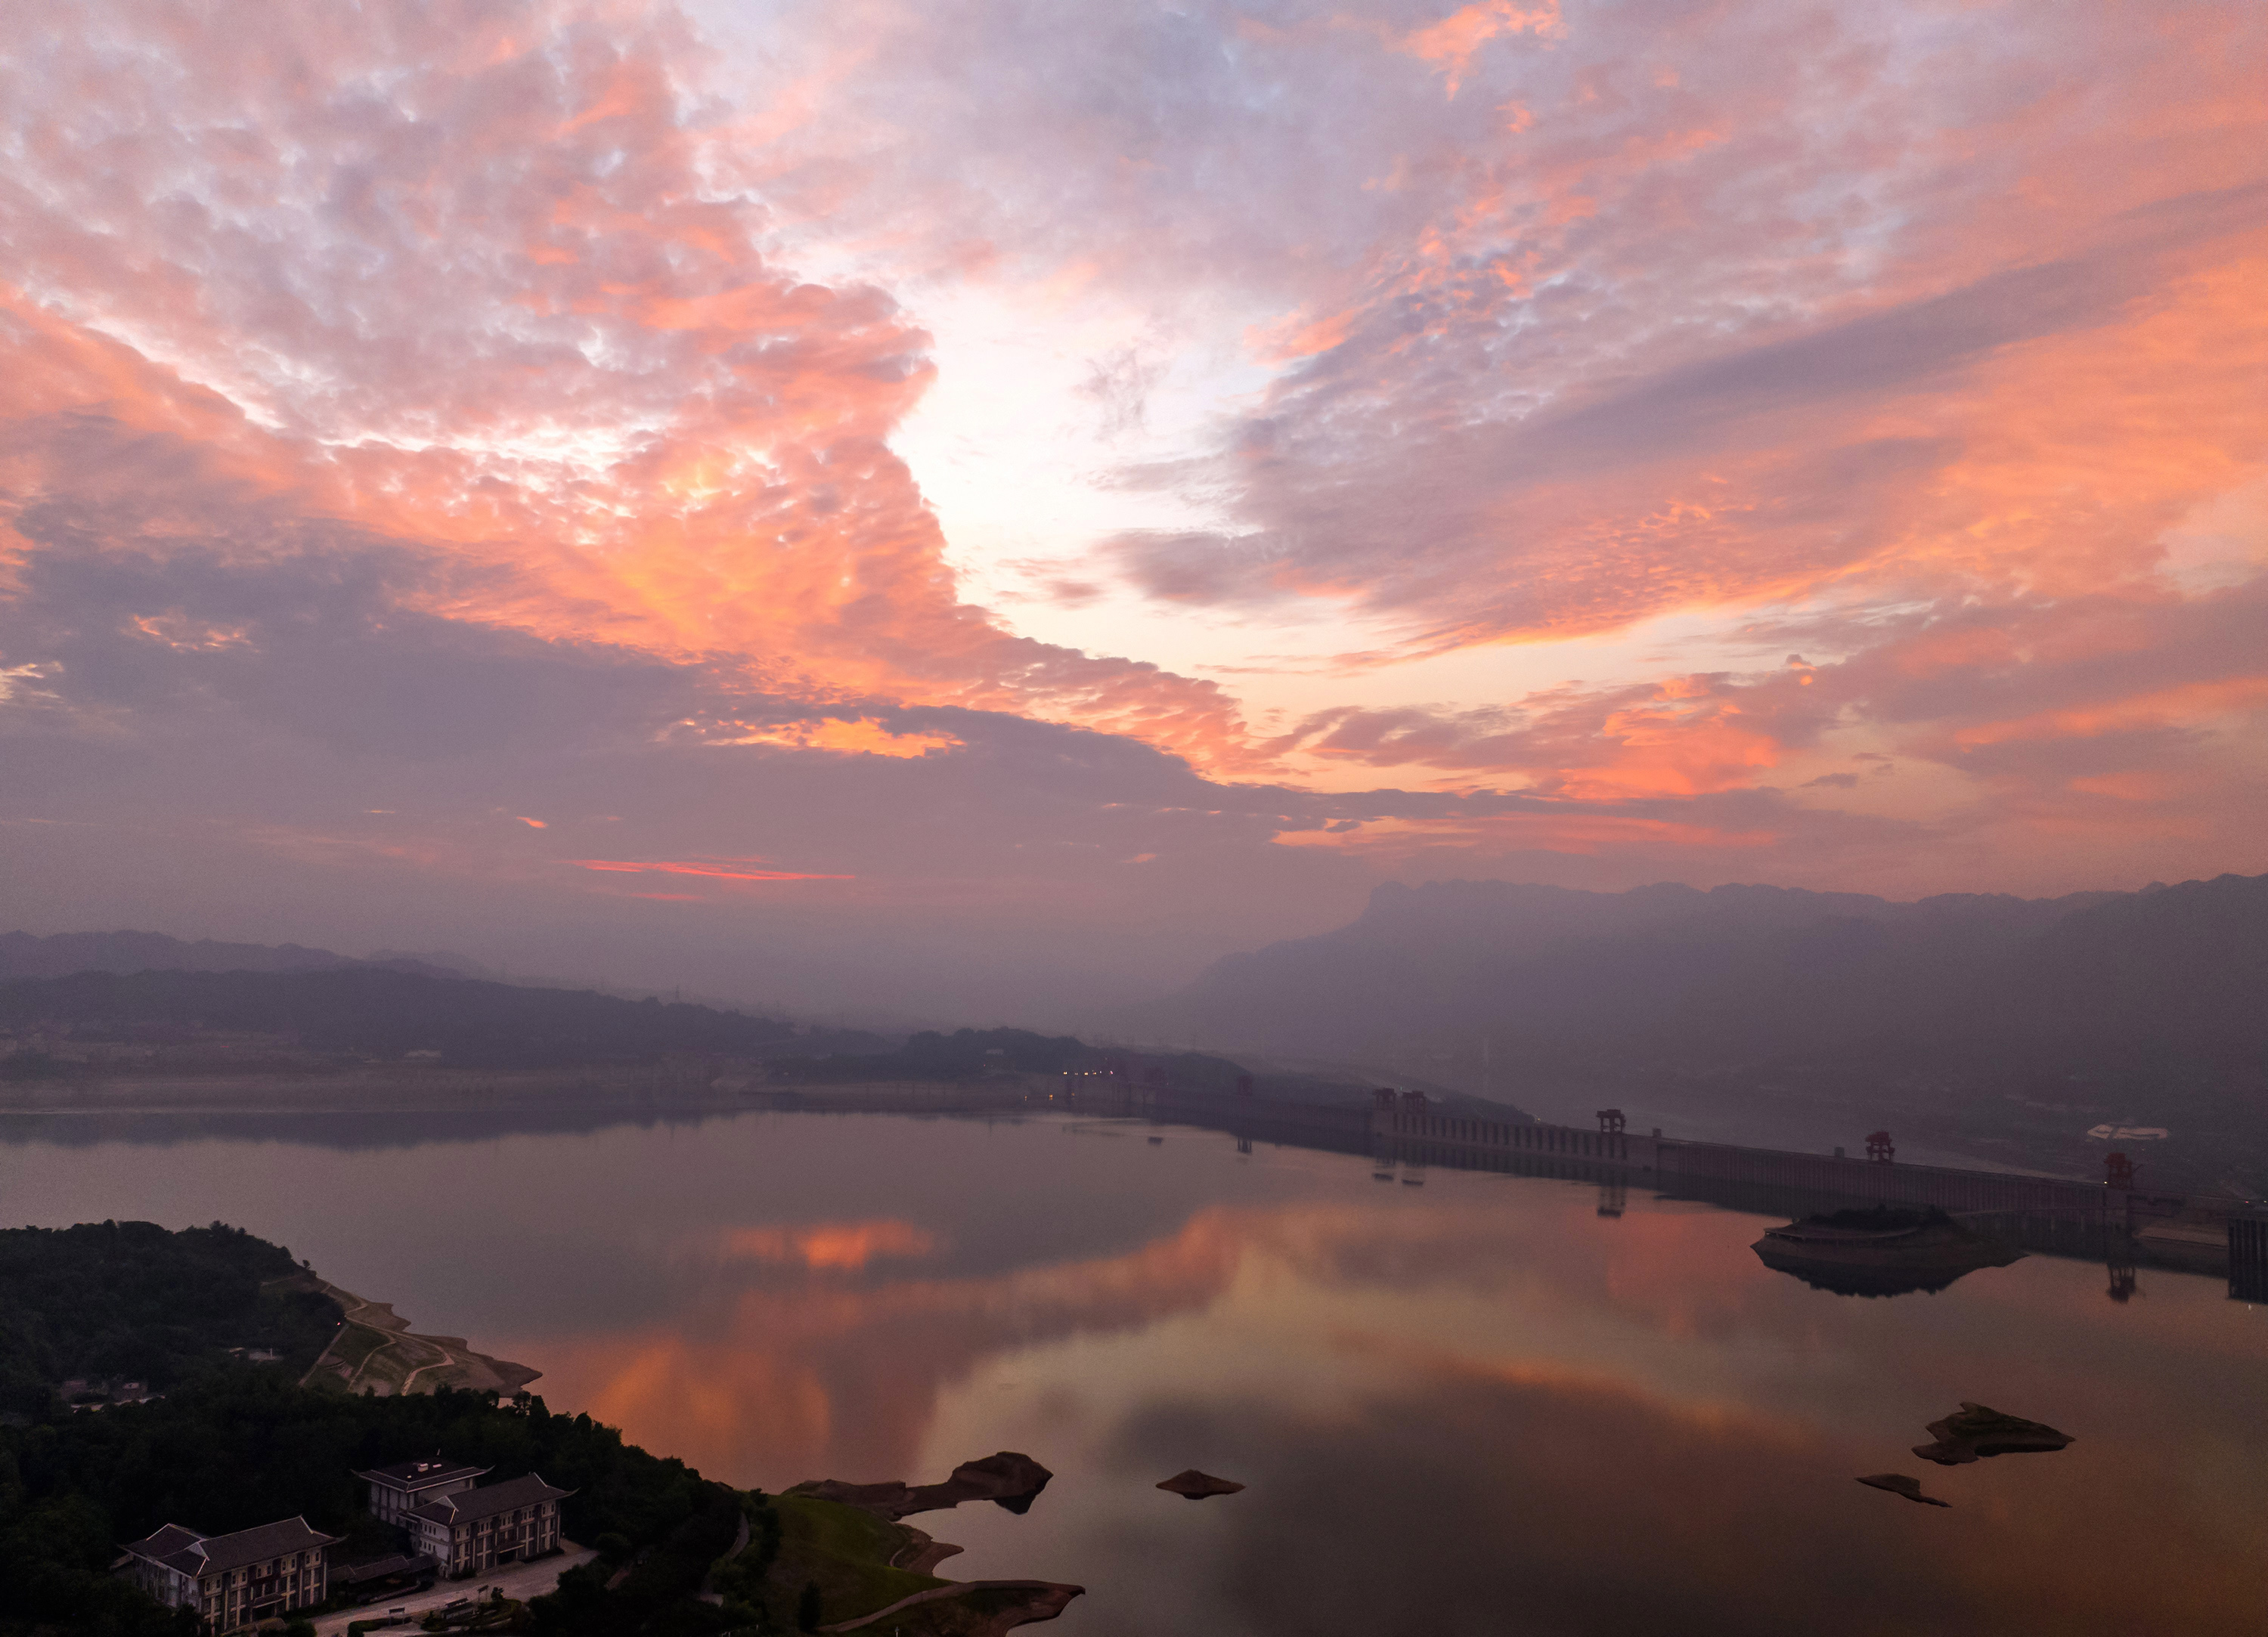  Zigui, Hubei: Sunrise, Colorful Clouds Flying in the Three Gorges